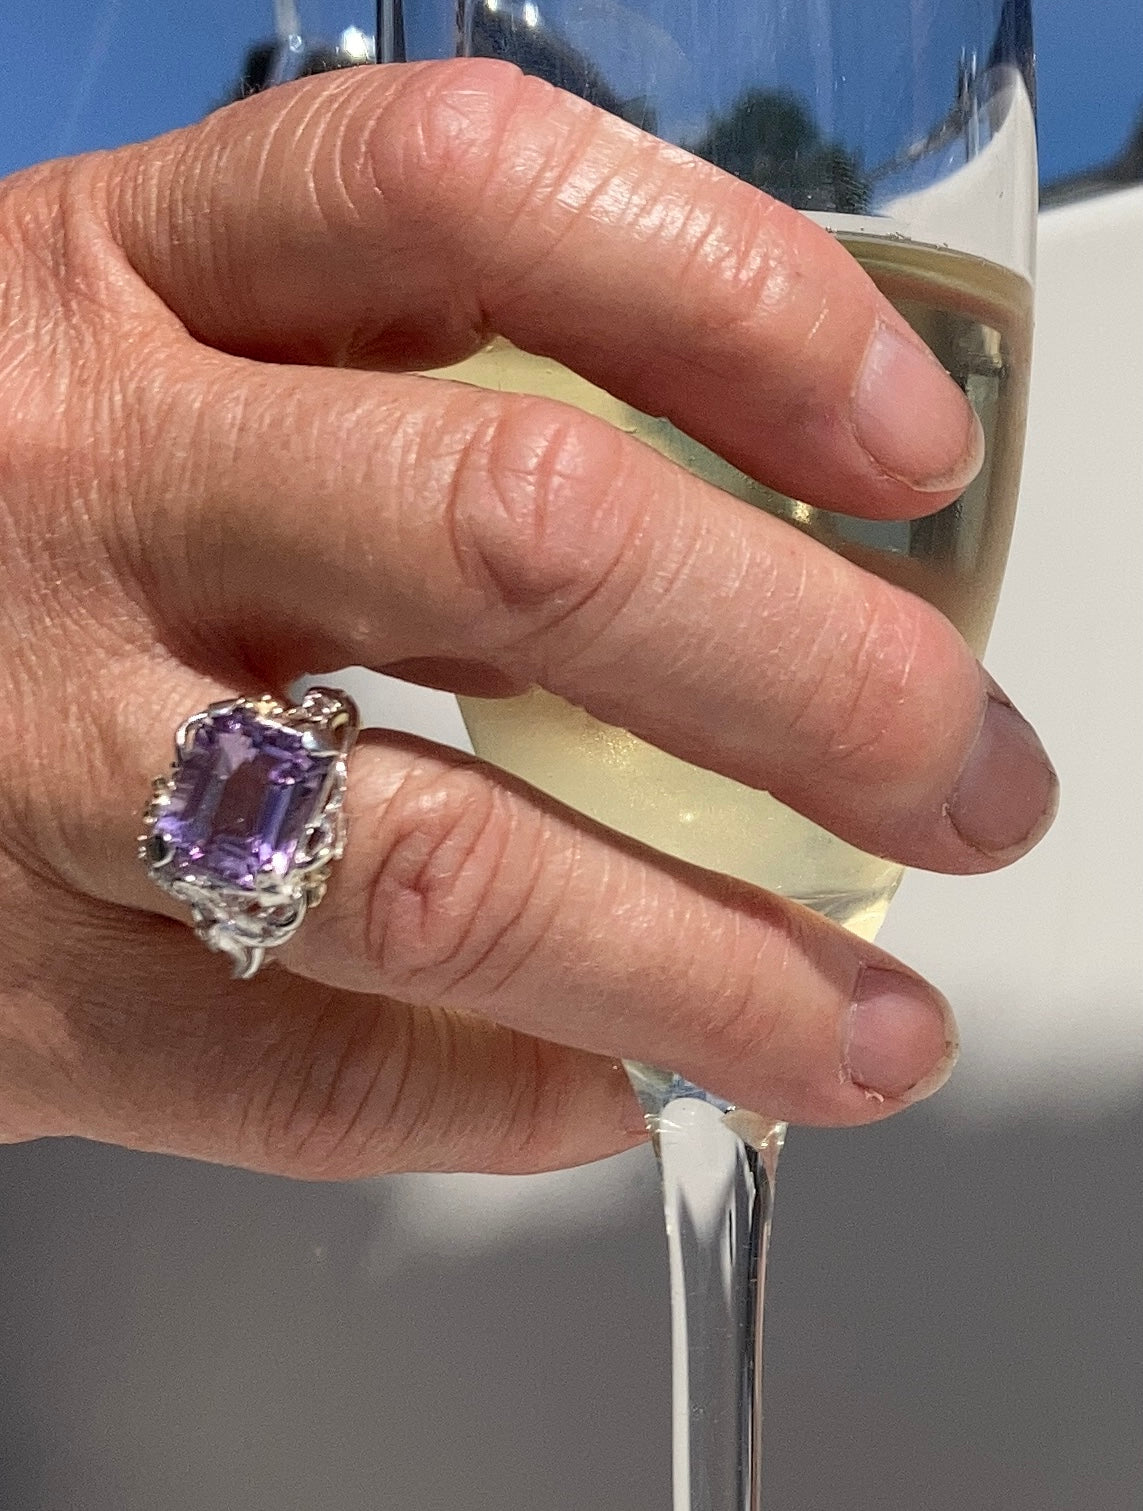 fancy oblong amethyst ring with floral details, on hand holding glass of wine